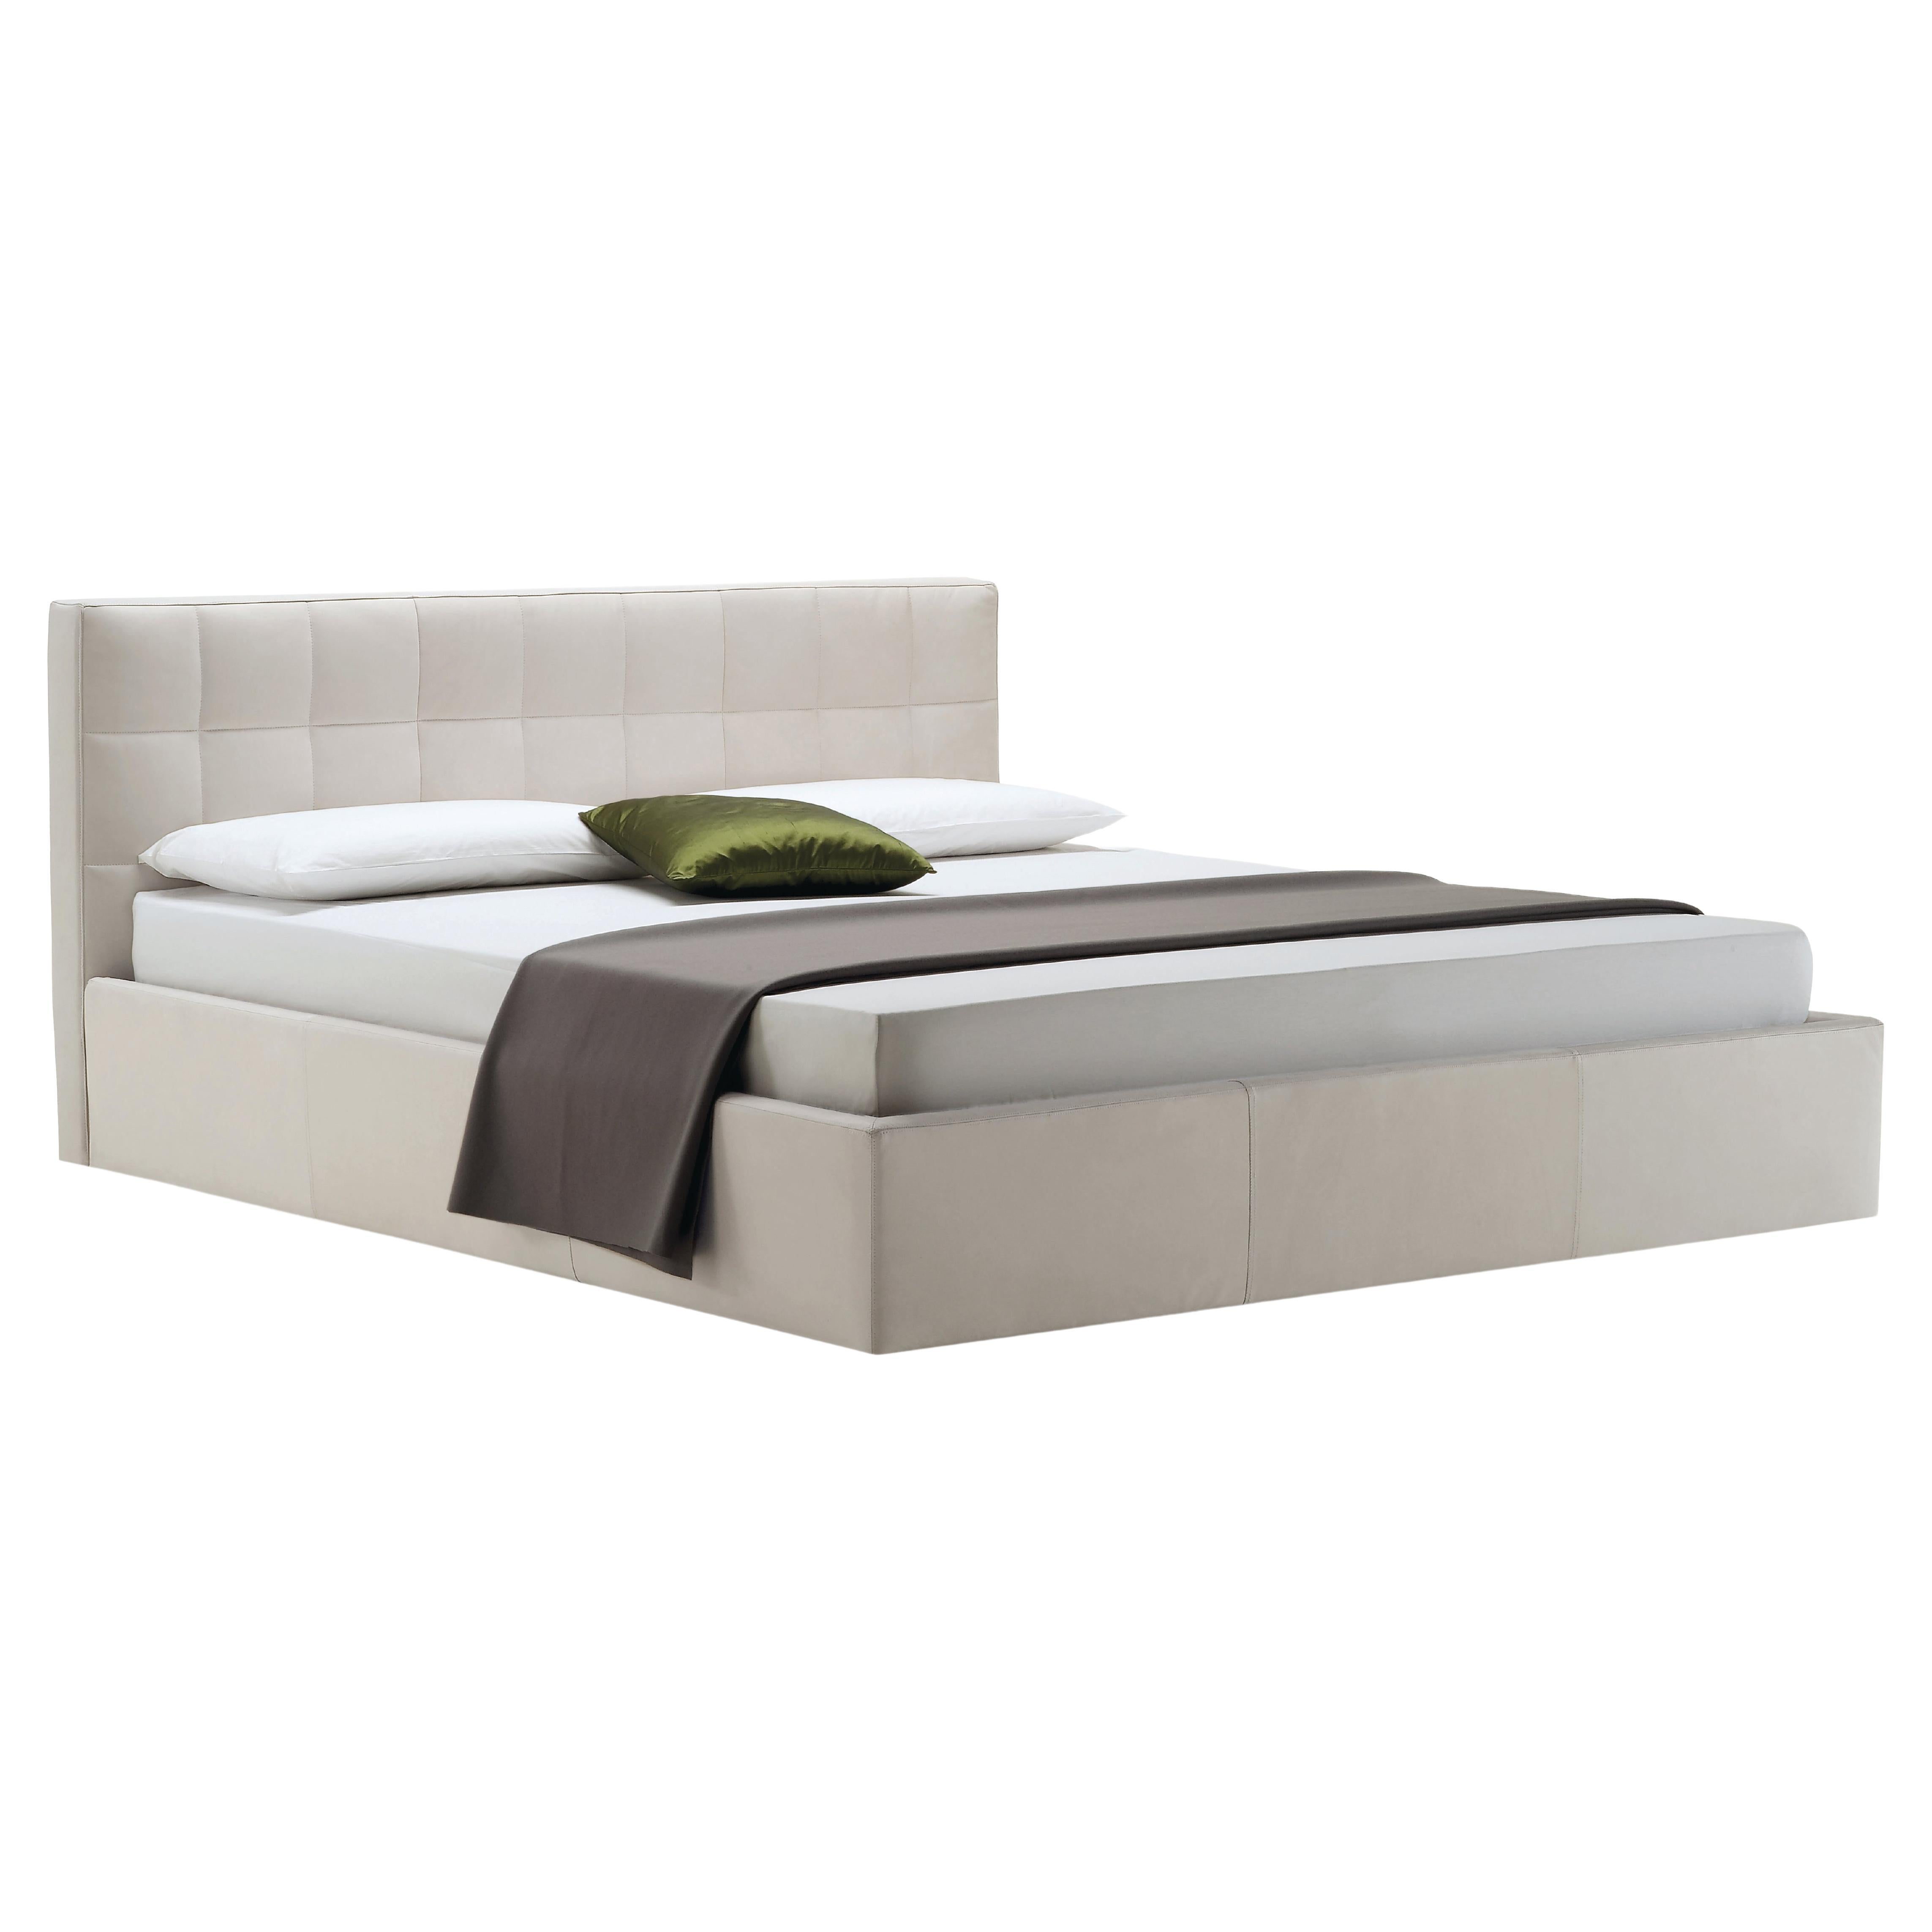 Zanotta Queen Size Box Bed without Container Unit in Beige Upholstery & Steel For Sale